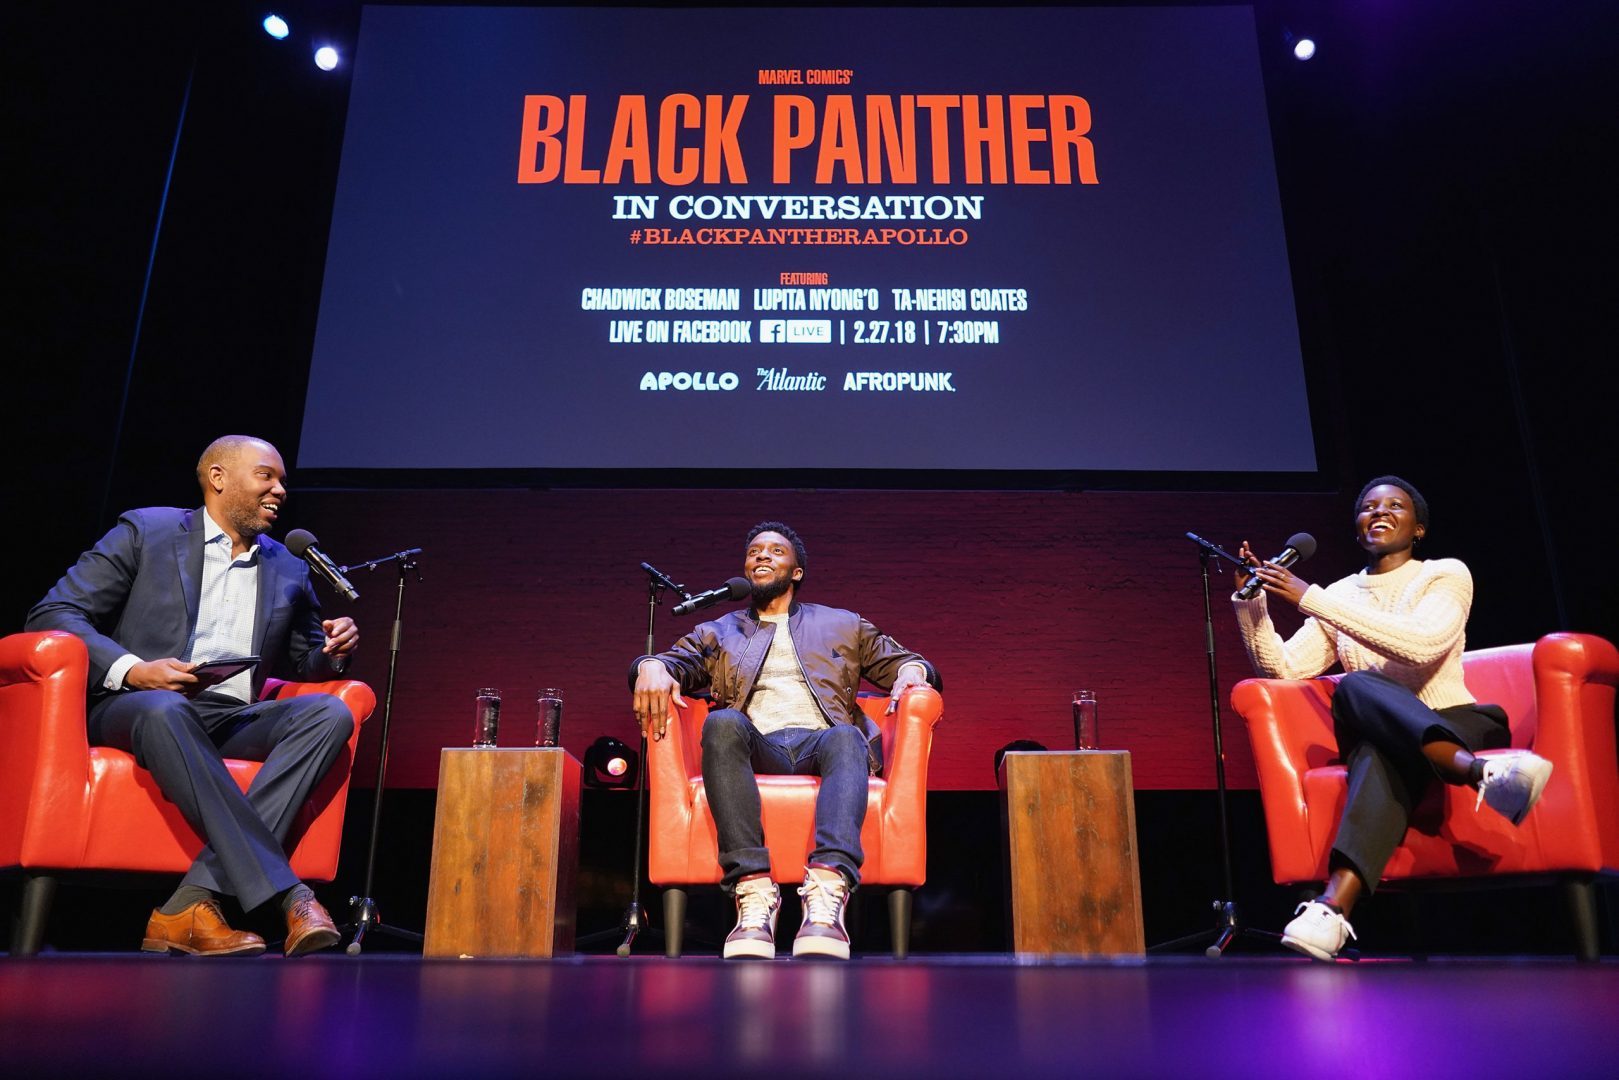 “Black Panther” Panel Discussion